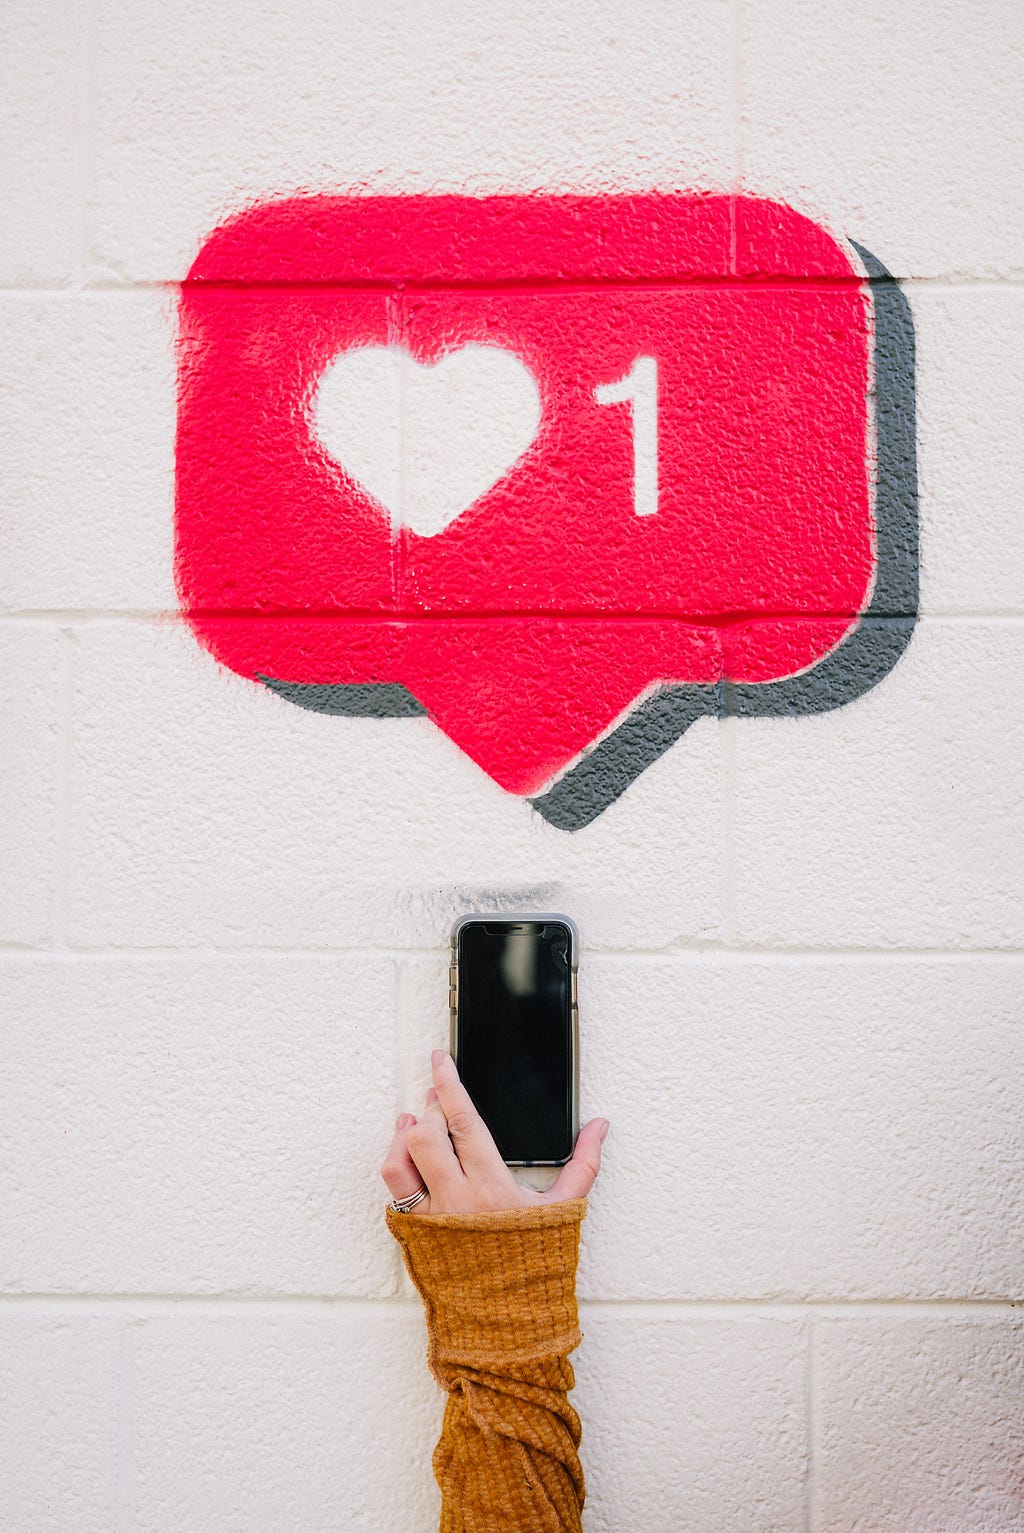 A hand is holding a mobile phone under a big red social media heart sign.